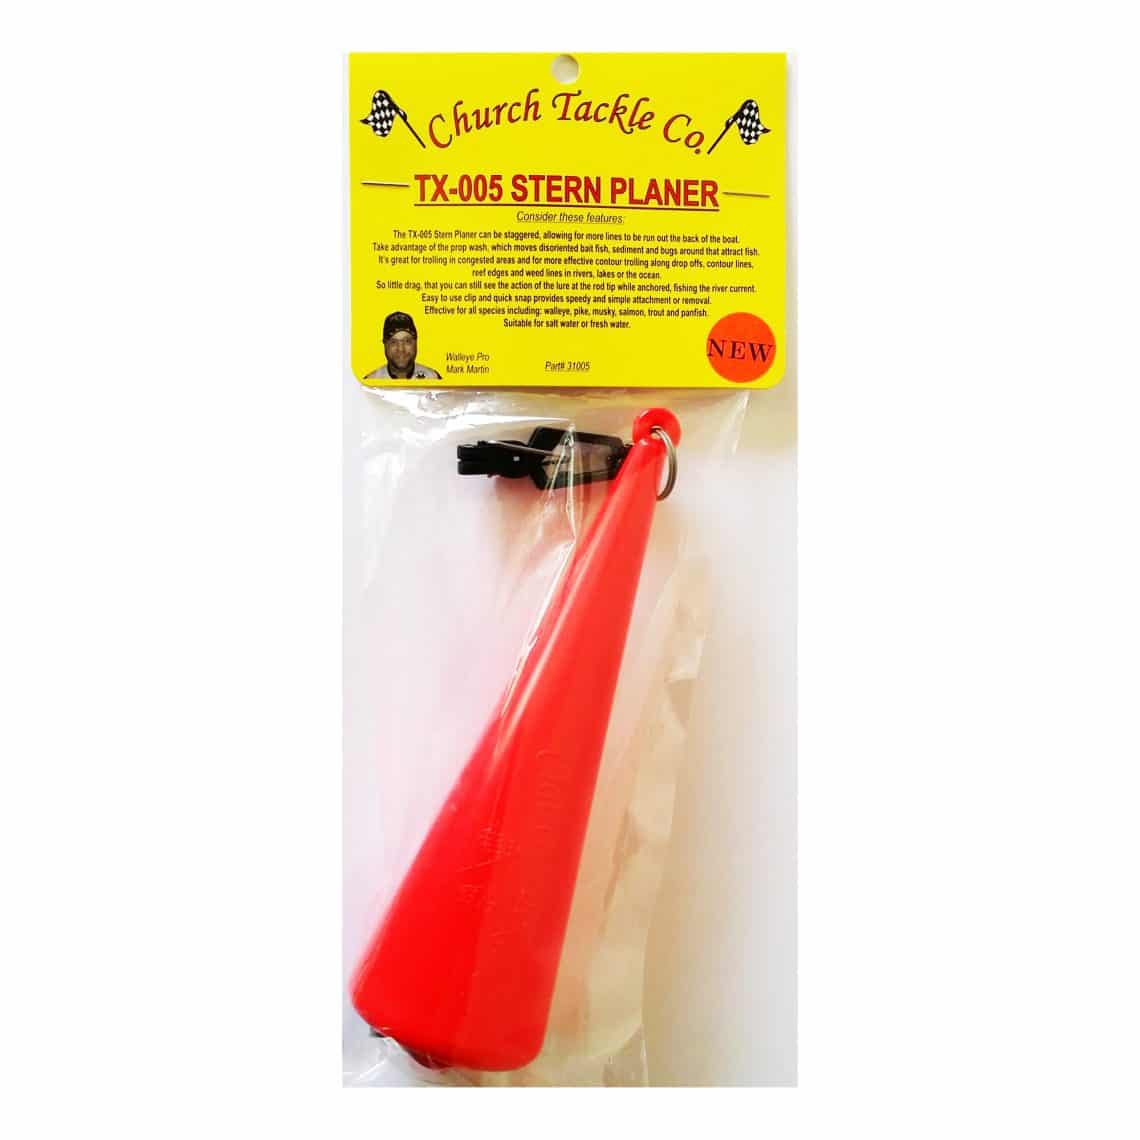 CHURCH TACKLE TX-005 STERN PLANER 31005 - Northwoods Wholesale Outlet